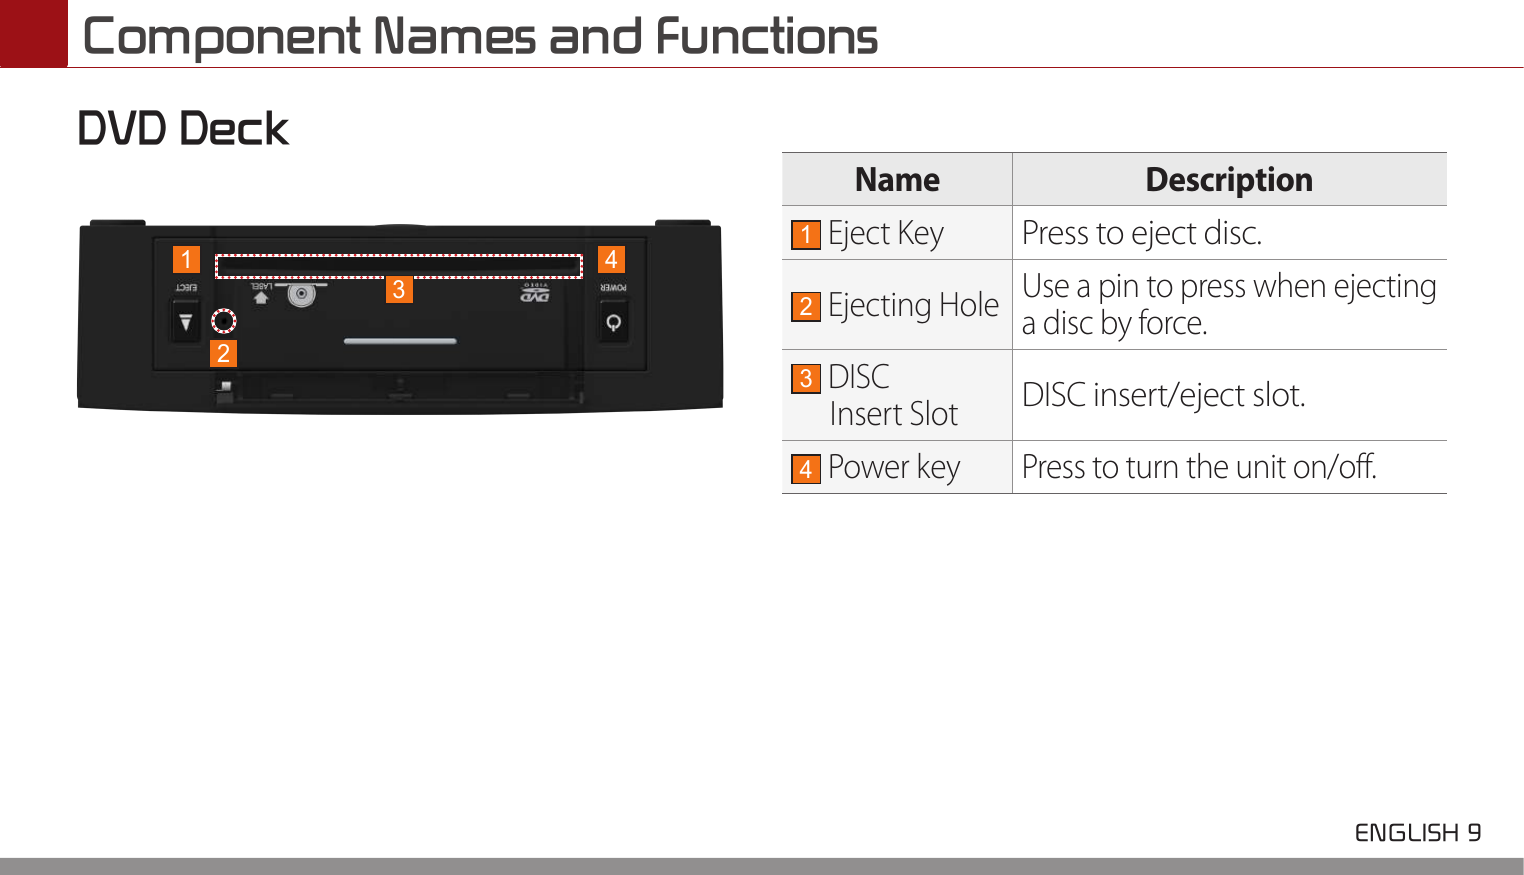  ENGLISH 9 Component Names and FunctionsDVD DeckName Description1 Eject KeyPress to eject disc.2 Ejecting Hole Use a pin to press when ejecting a disc by force.3 DISC  Insert SlotDISC insert/eject slot.4 Power key Press to turn the unit on/off.1 423